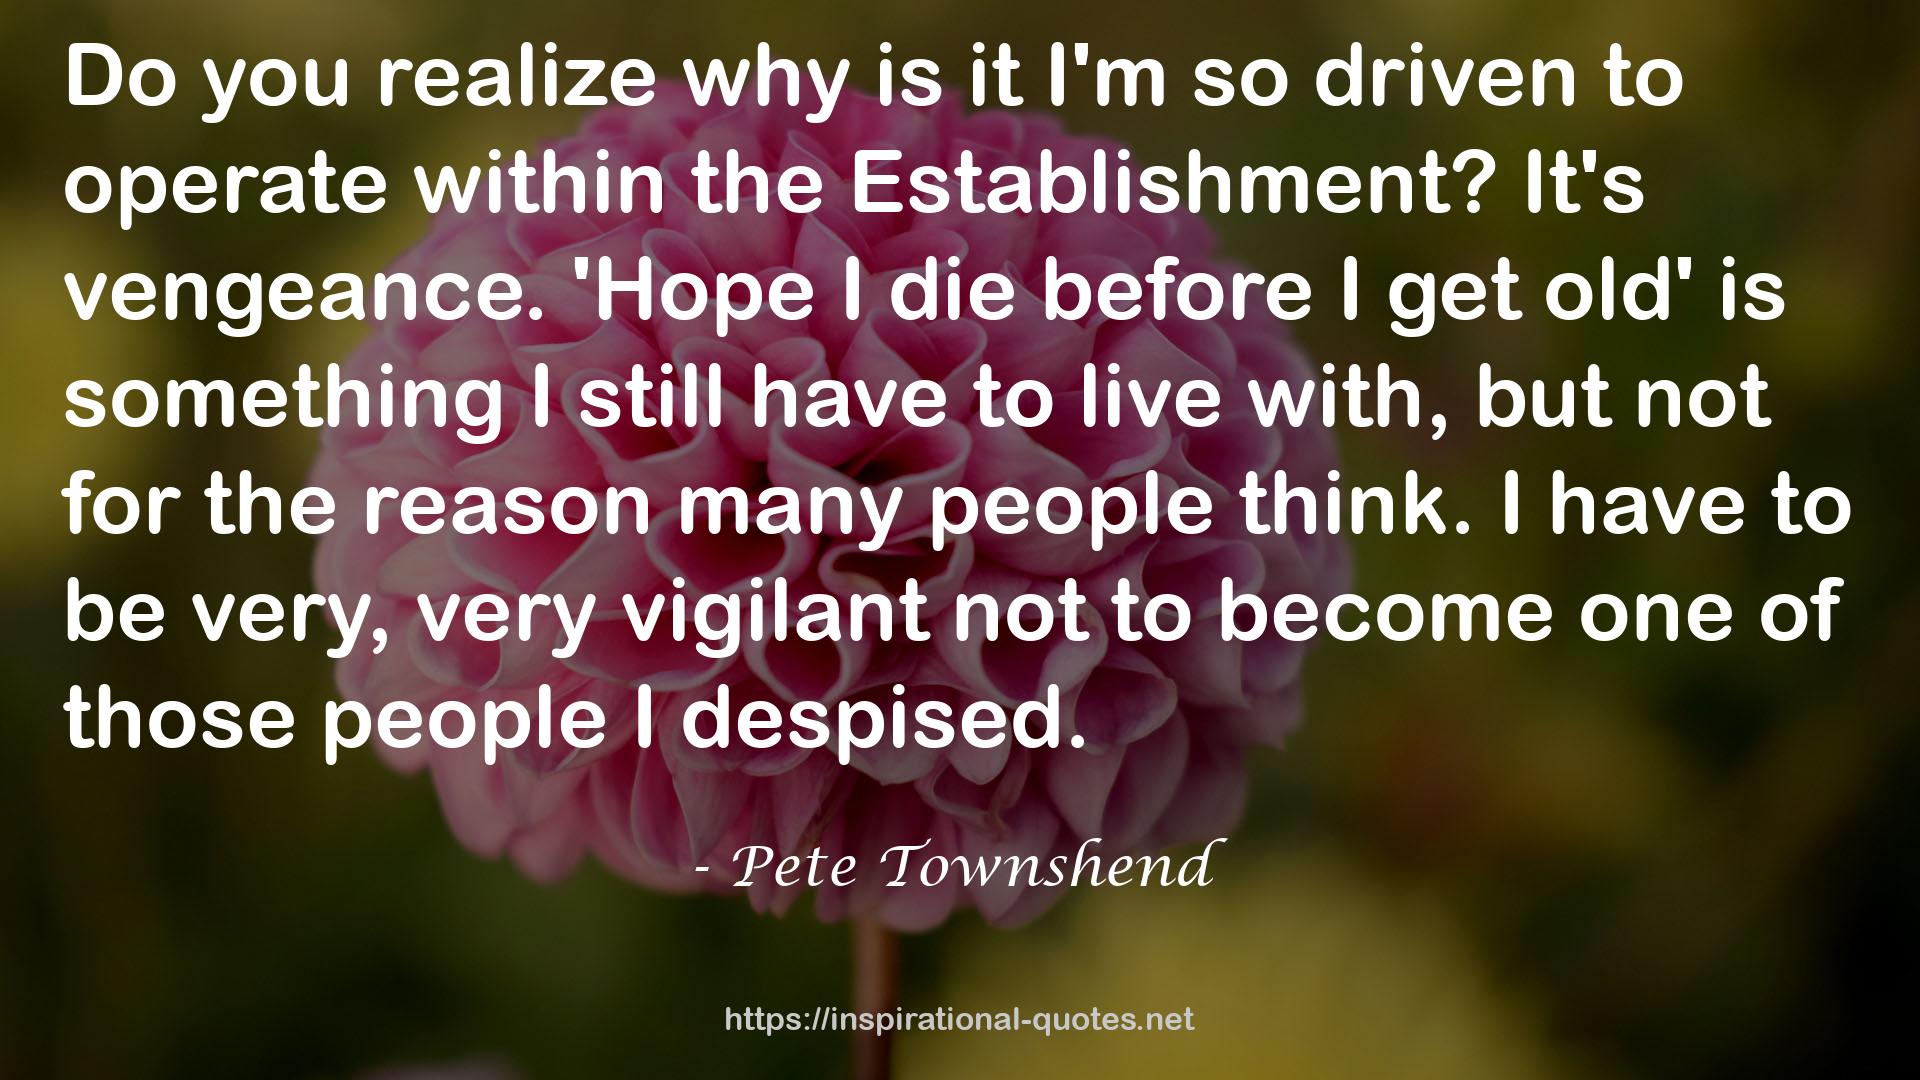 Pete Townshend QUOTES